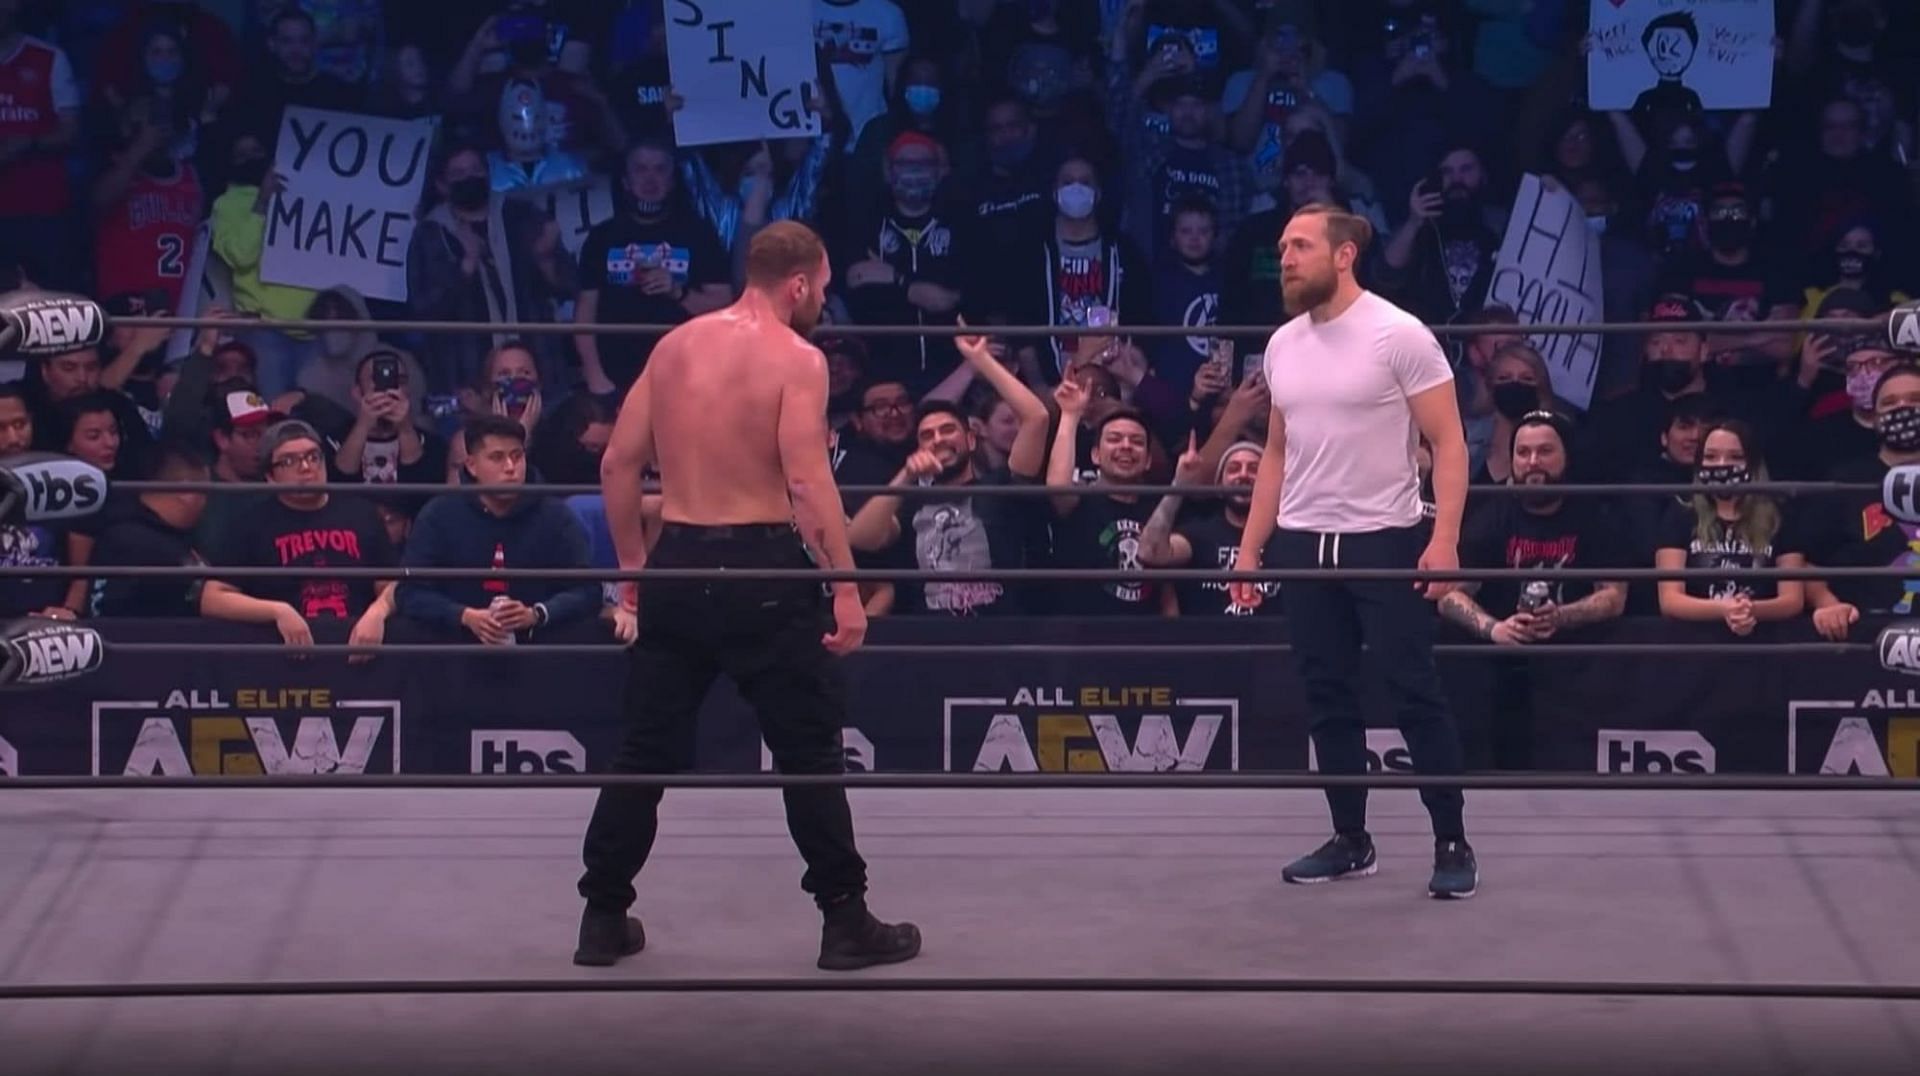 Jon Moxley and Bryan Danielson made their tag debut on Dynamite this week.